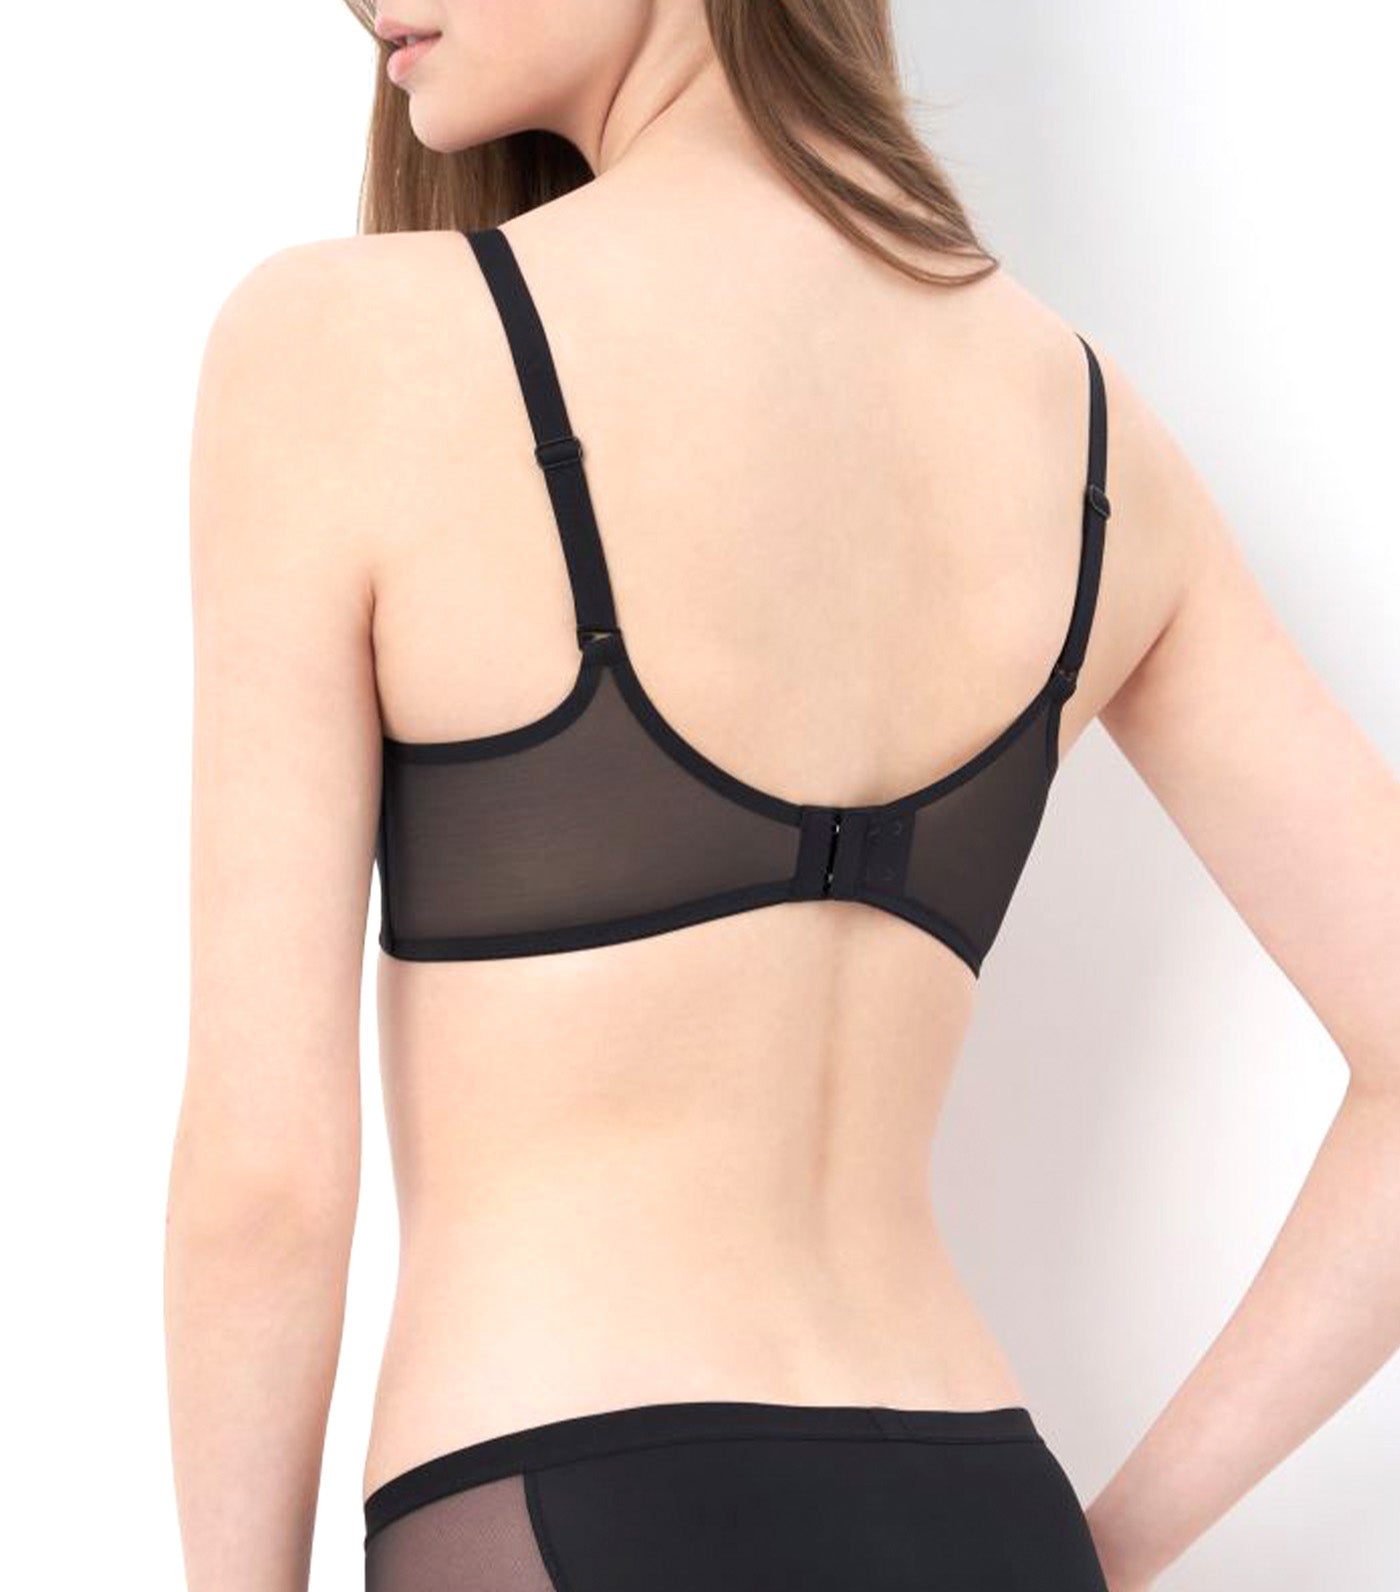 Non-wired lace push-up bra - Black - Ladies